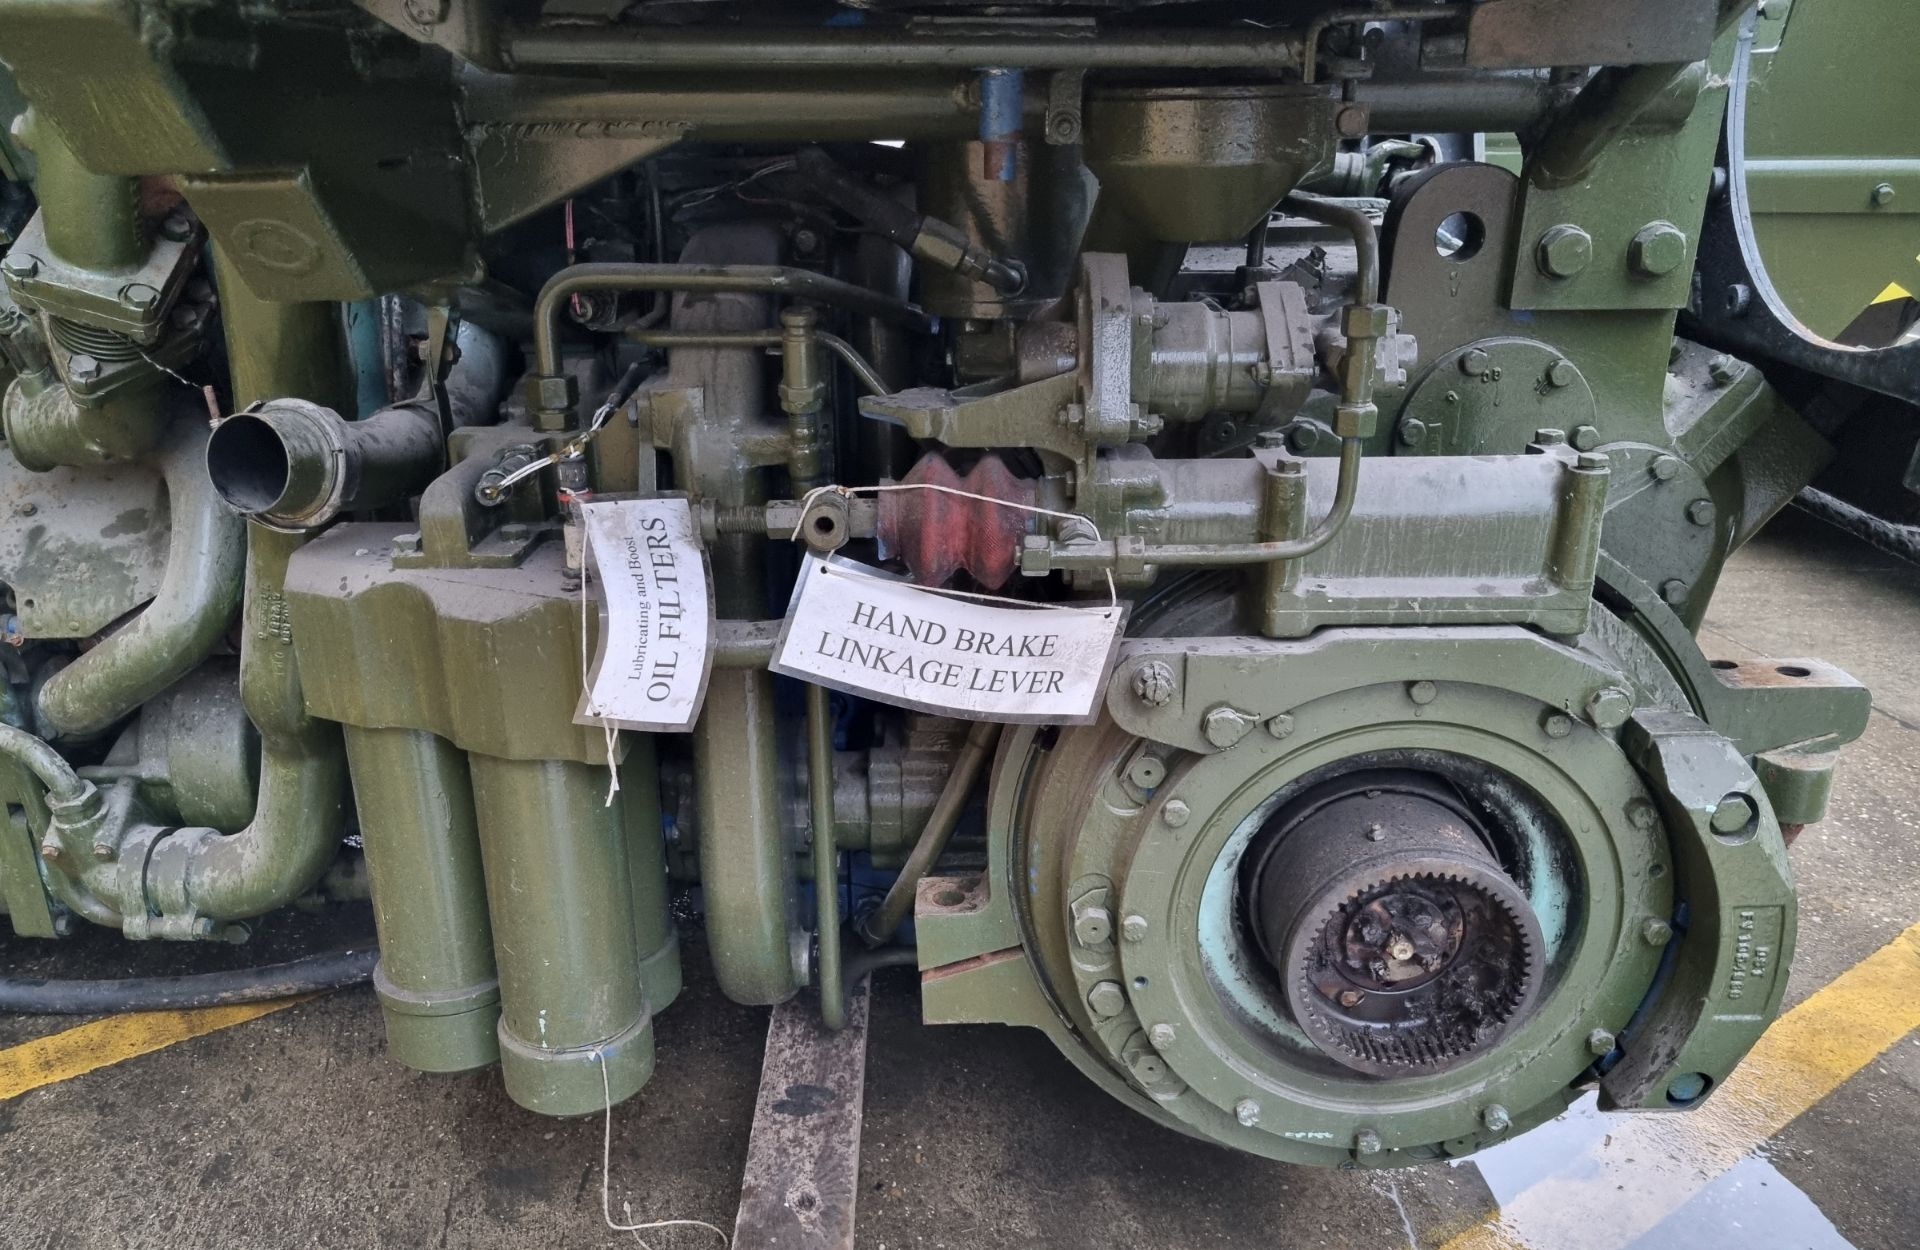 Challenger 2 tank engine Rolls Royce CV12 26 litre twin turbo diesel engine and transmission - Image 13 of 21